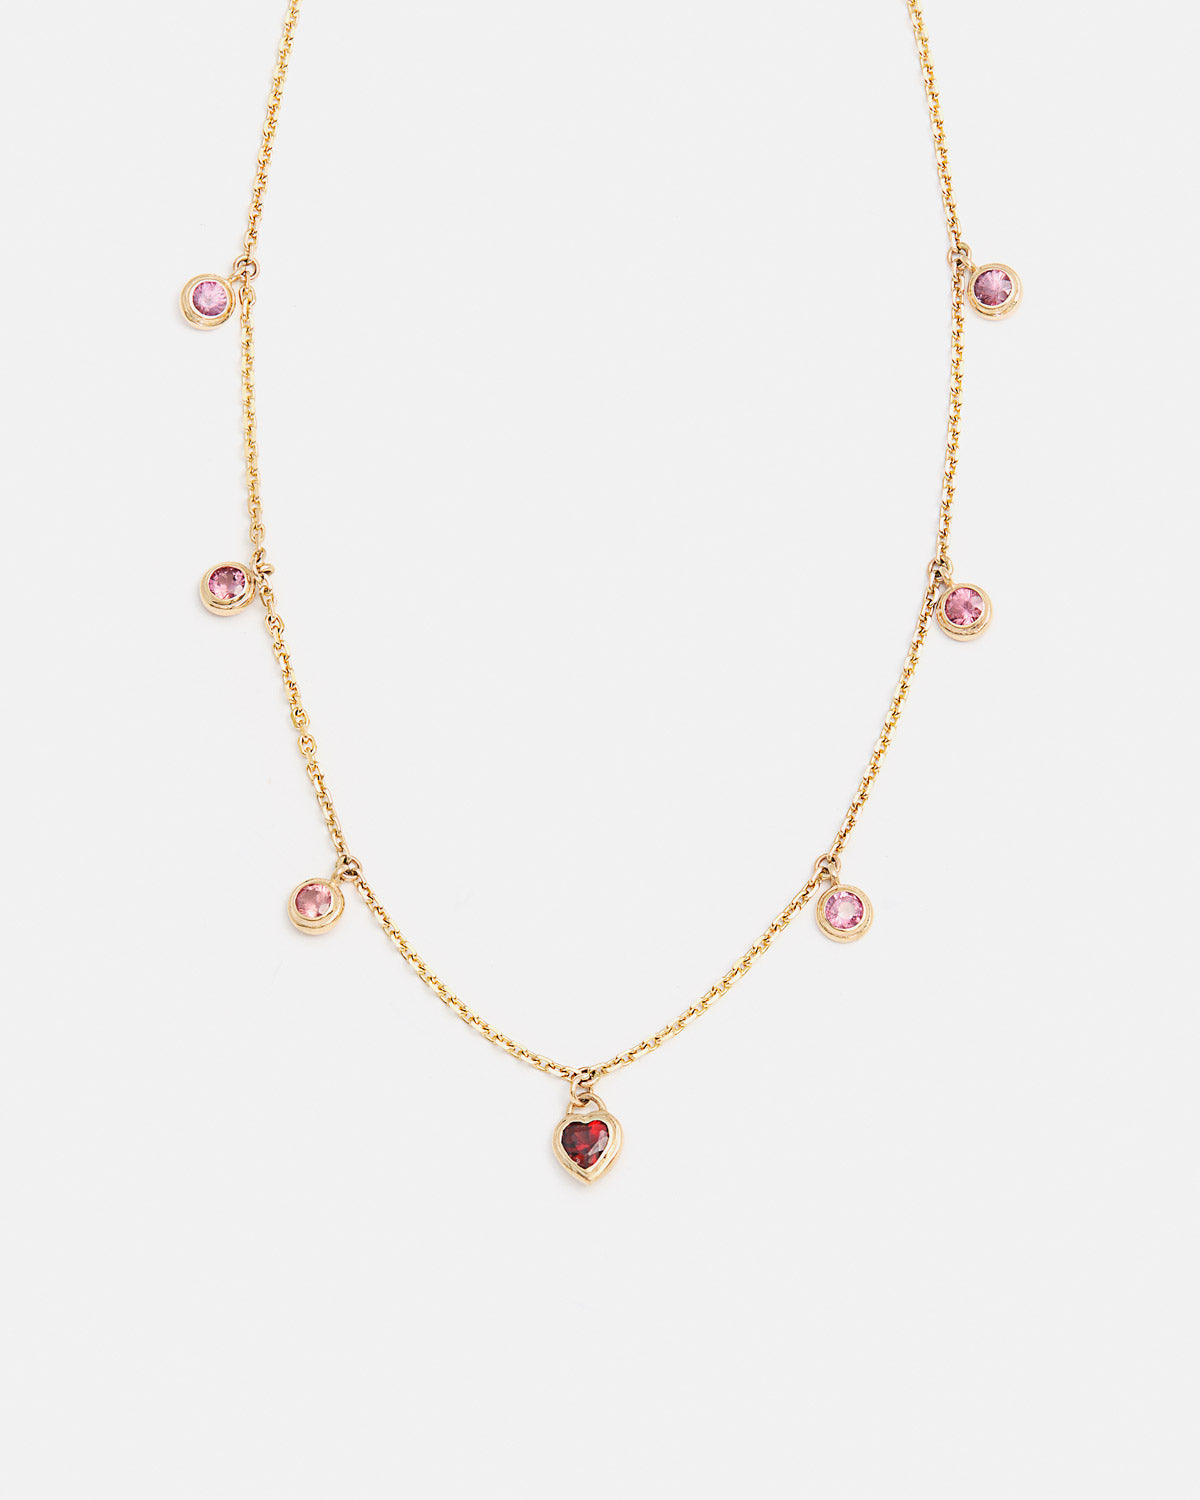 Destiny Necklace in Gold with Garnet and Rubies